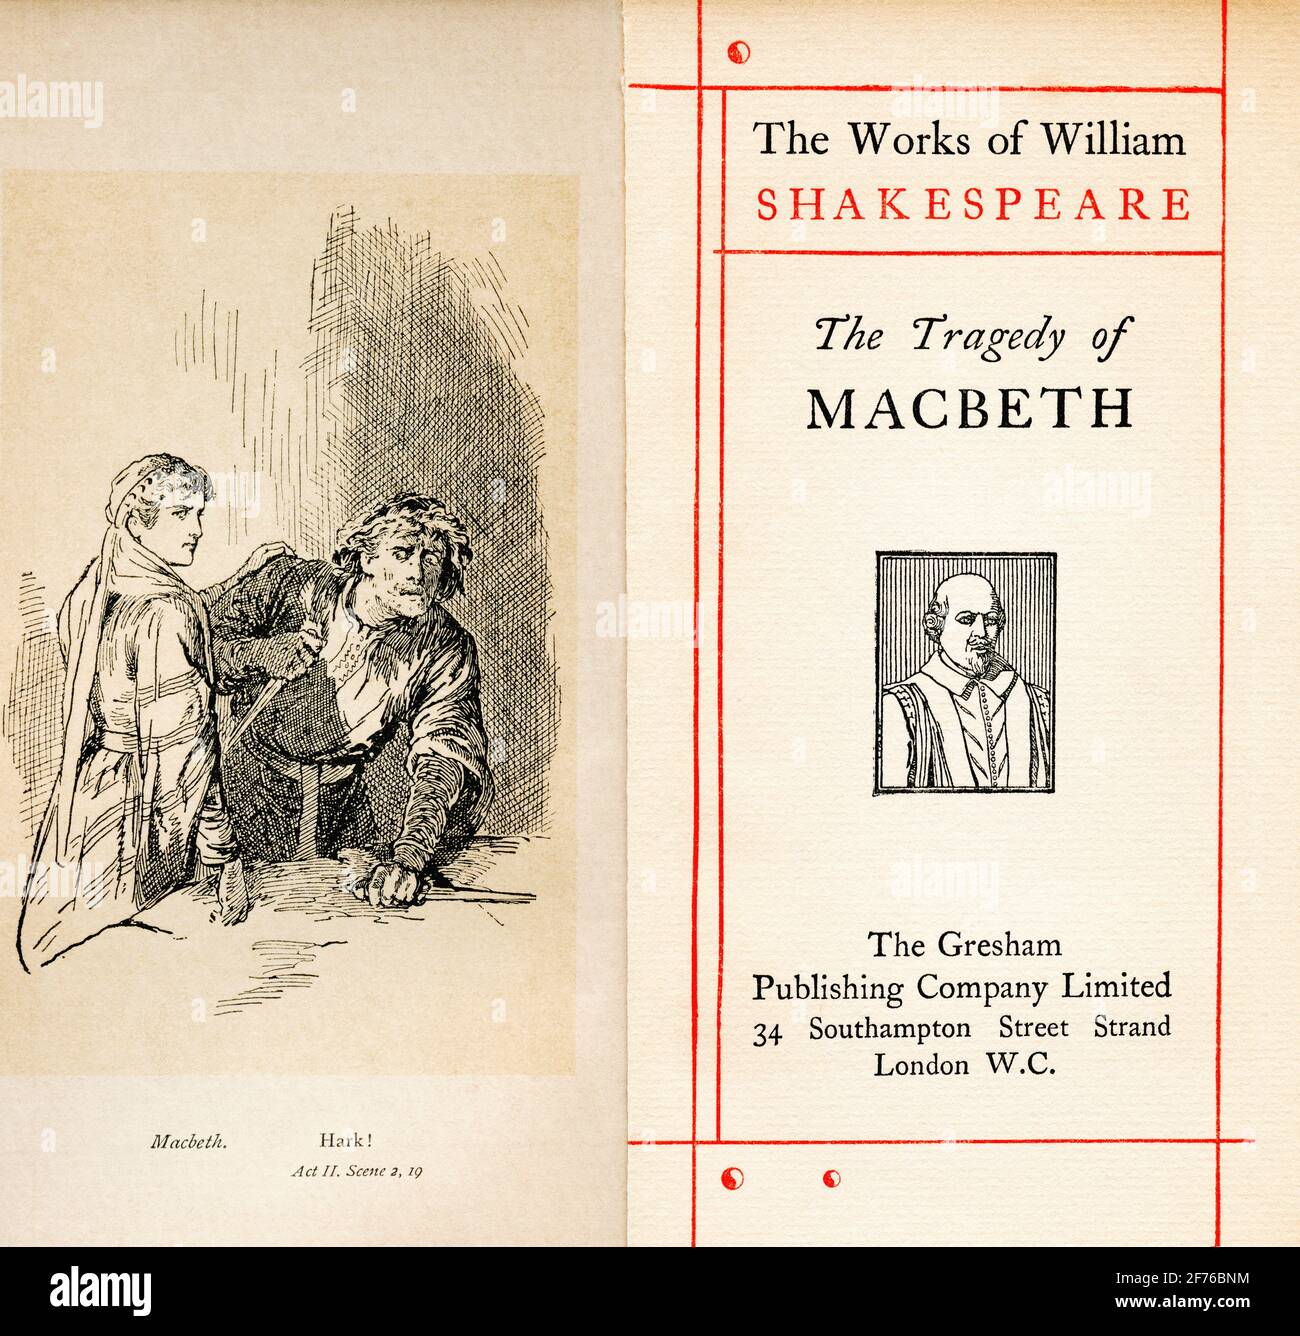 Frontispiece and title page from the Shakespeare play Macbeth. Act II, Scene 2. Macbeth, ' Hark! '. From The Works of William Shakespeare, published c.1900 Stock Photo